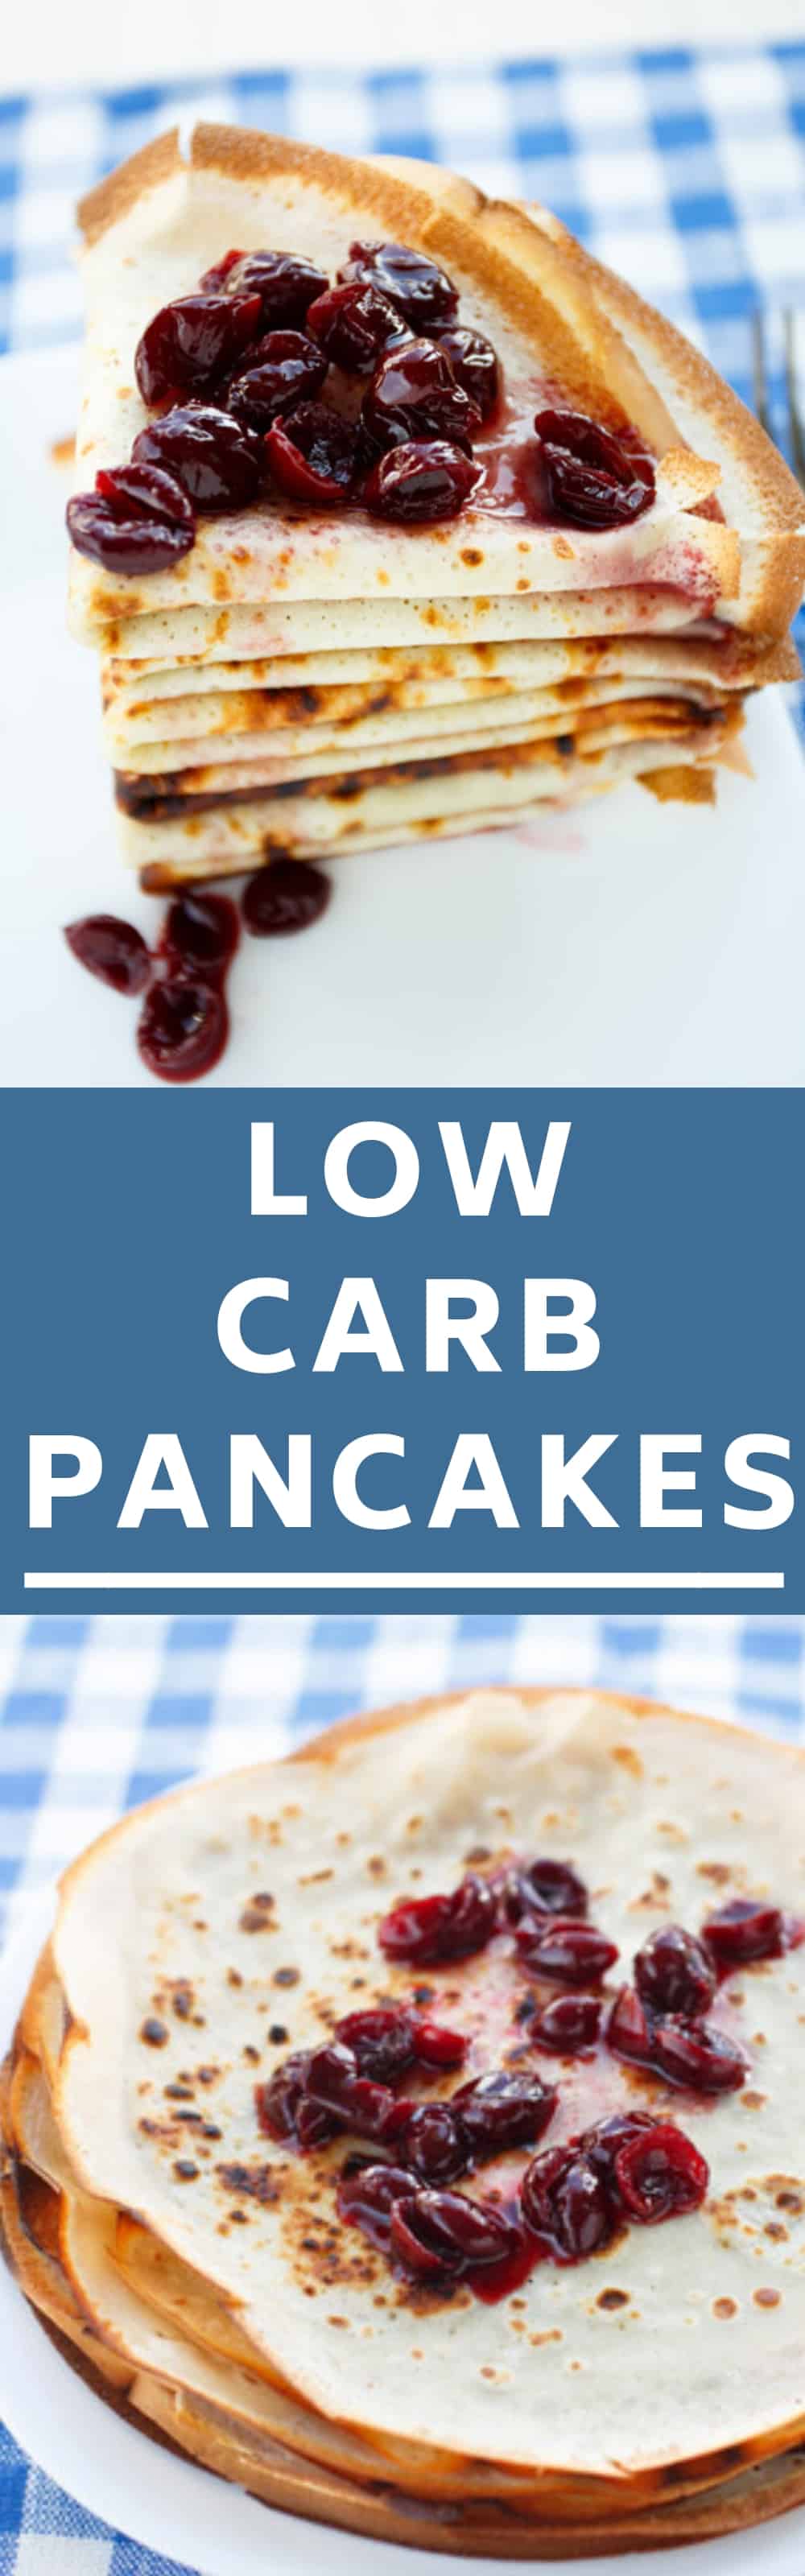 Low Carb Pancakes recipe. These easy to make keto pancakes are made with cream cheese, eggs and coconut flour.  Make them for a healthy breakfast meal! 